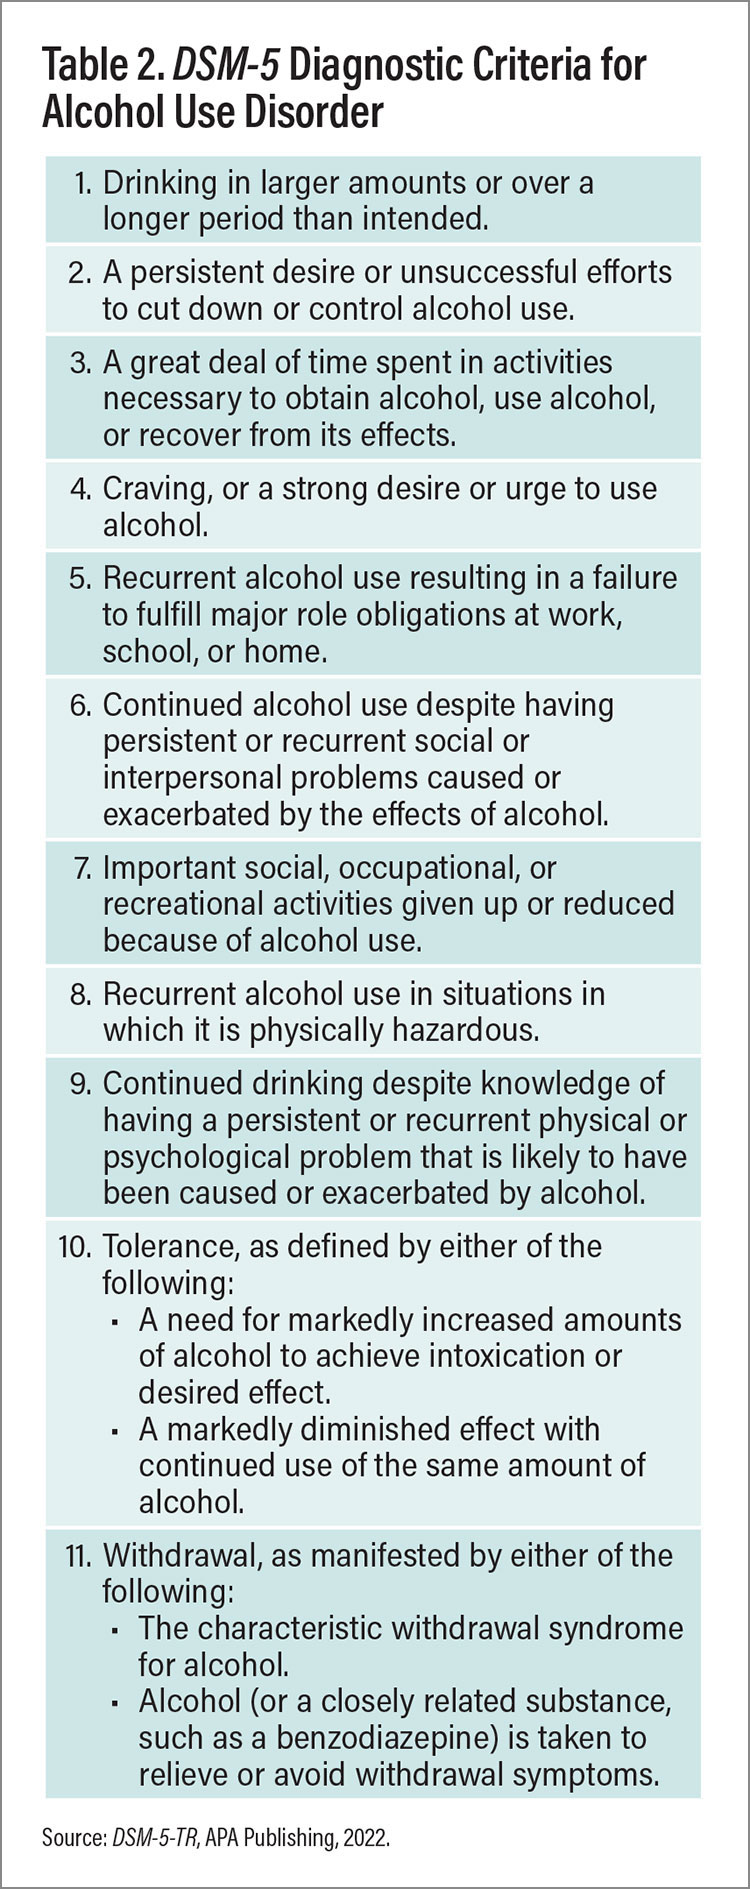 Table showing DSM-5 Diagnostic Criteria for Alcohol Use Disorder 